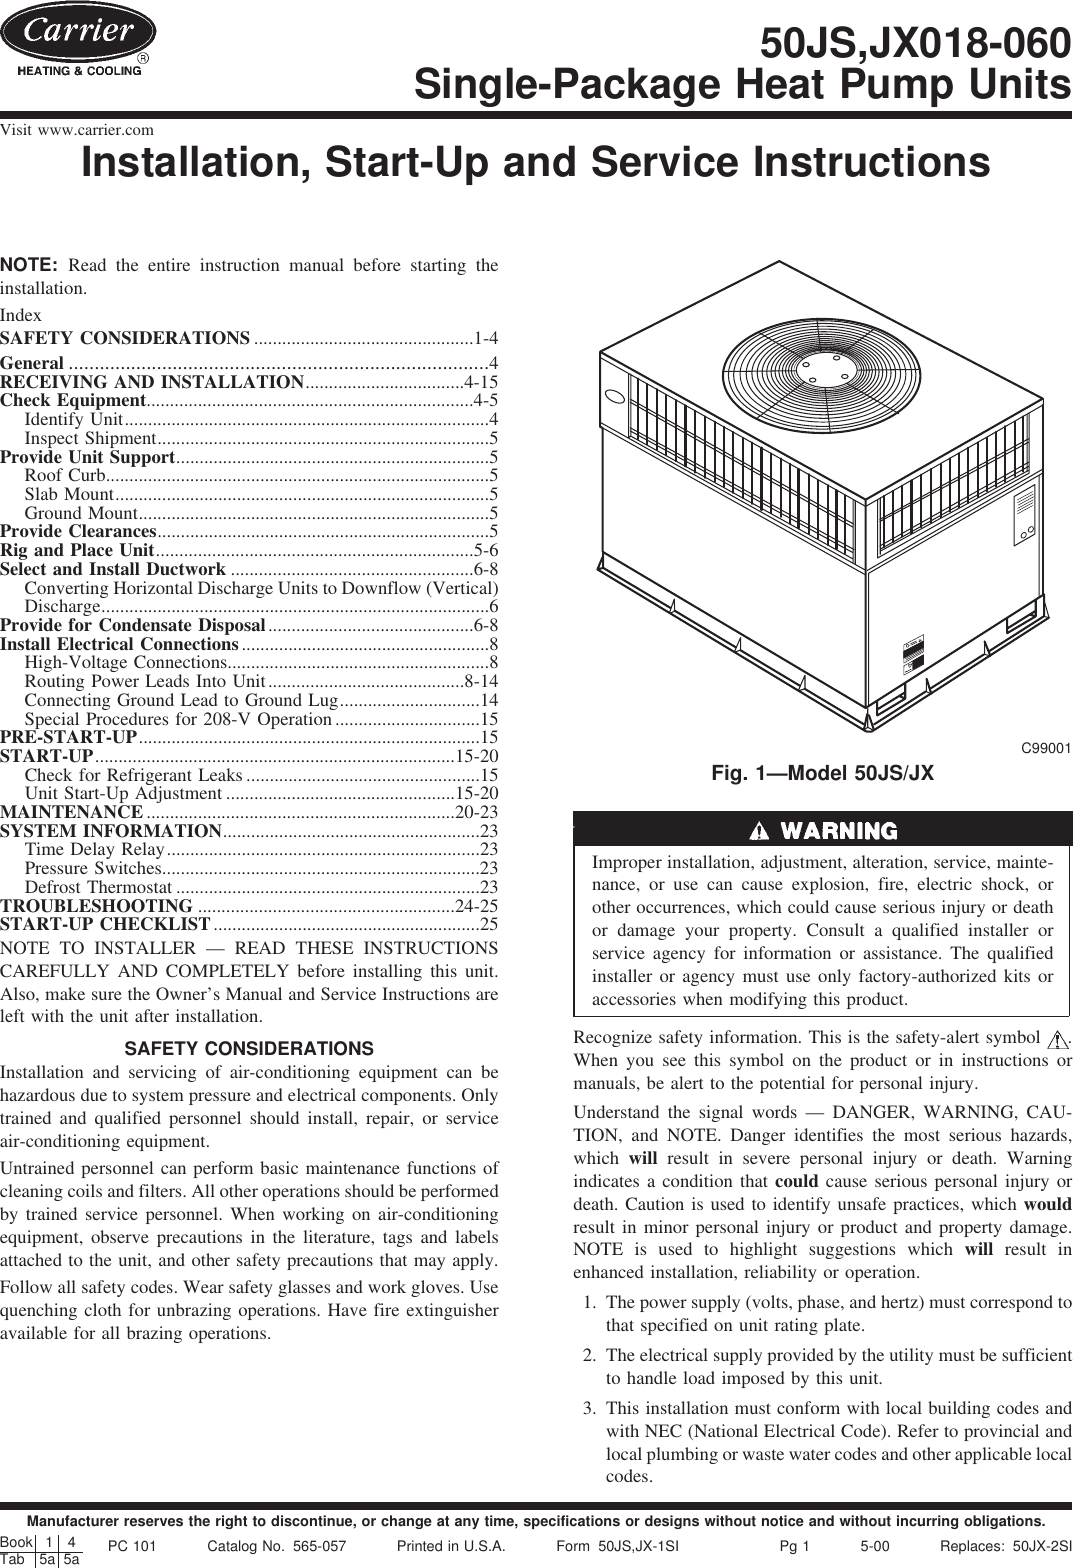 Carrier 50Js Users Manual